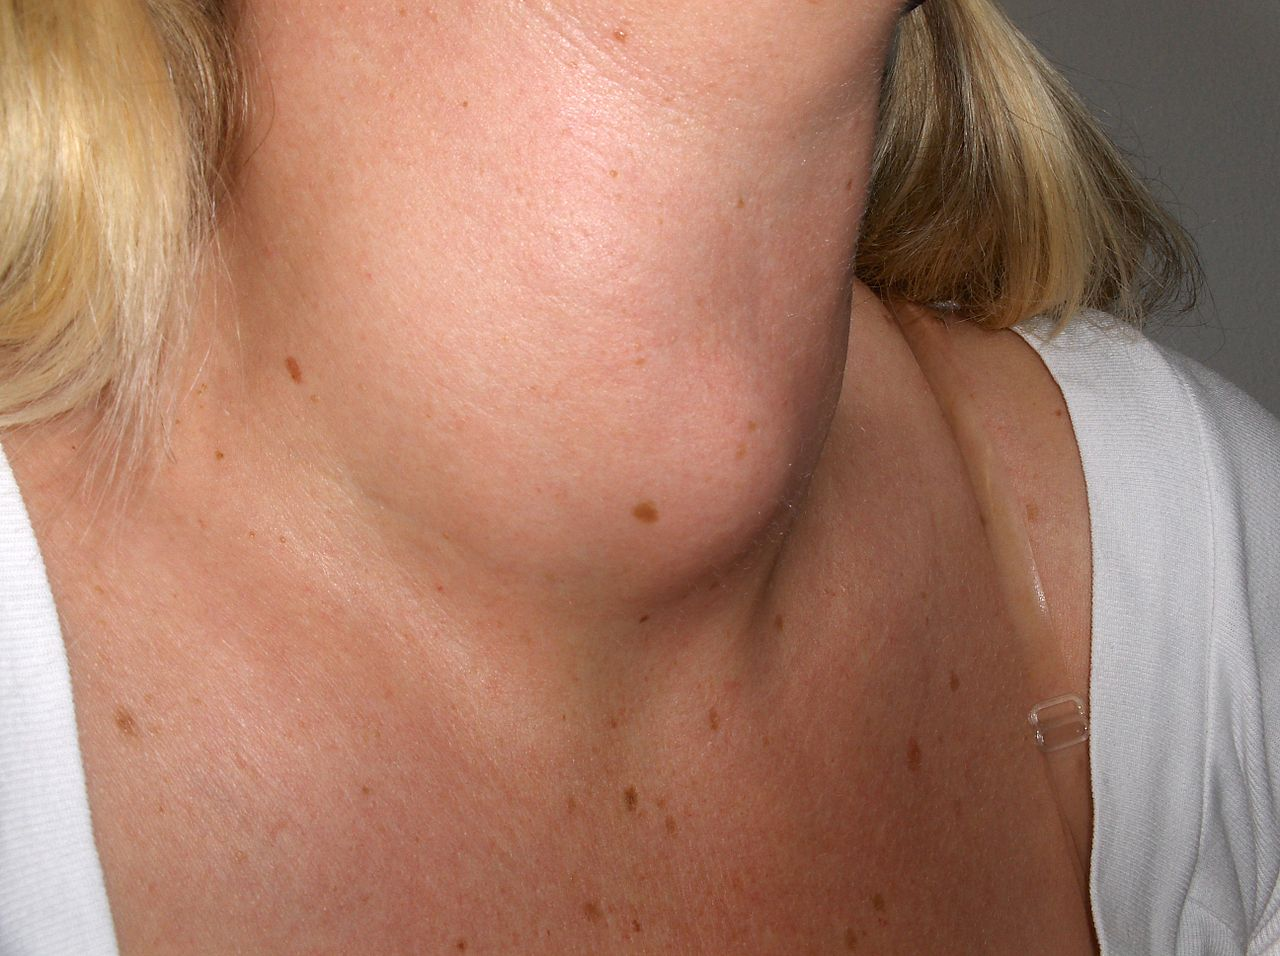 Hypothyroidism caused by under use of iodine can cause goiter to develop on the throat.